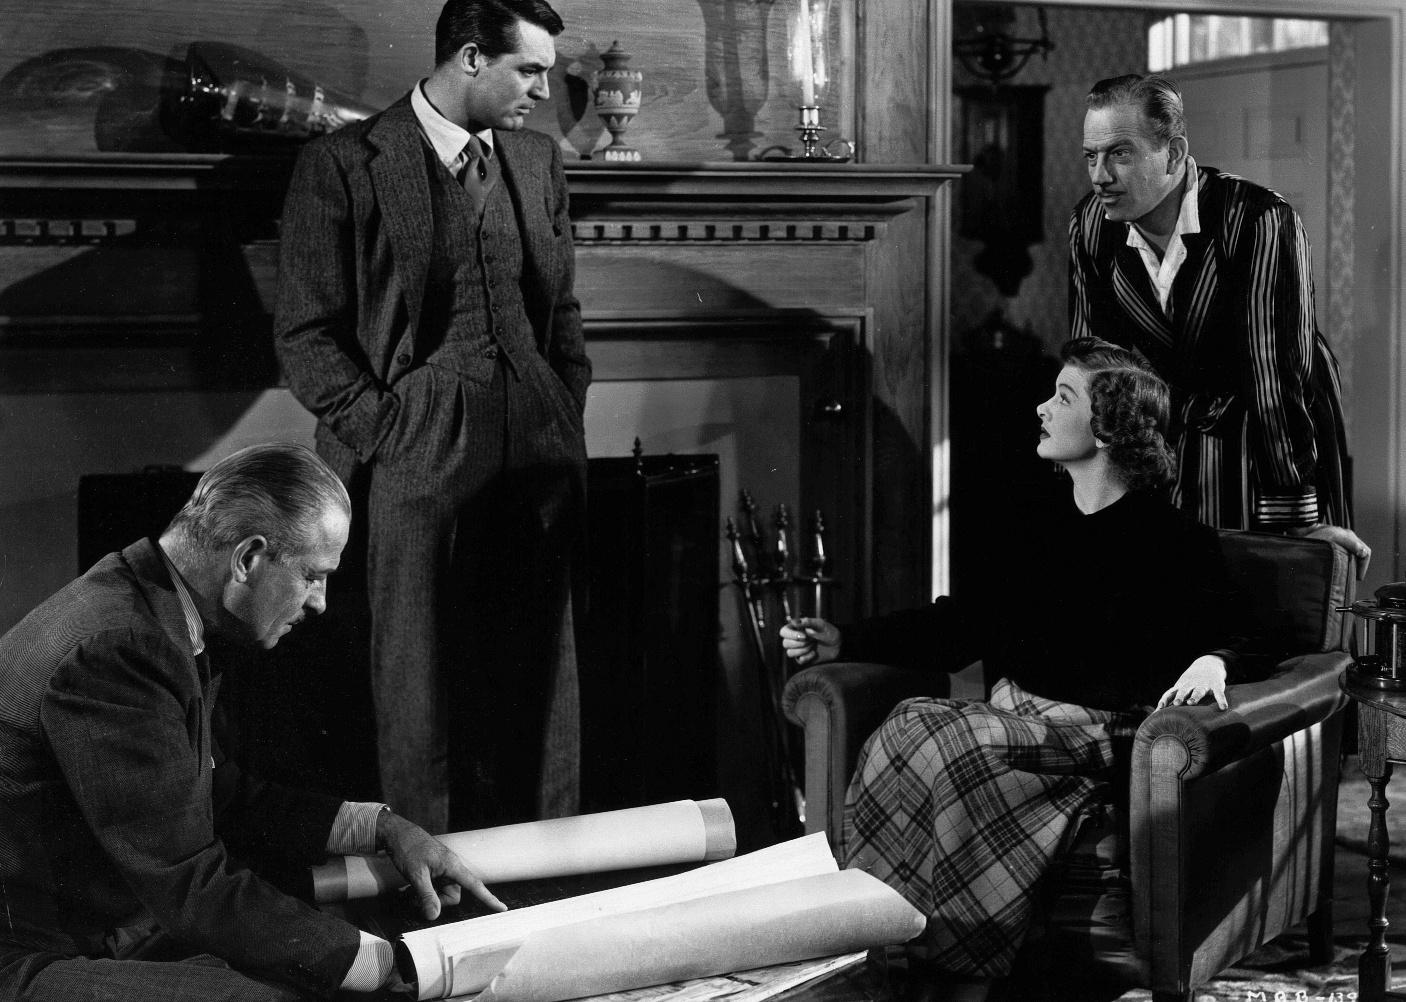 Cary Grant talks with a group of people in a living room with blueprints on a table.